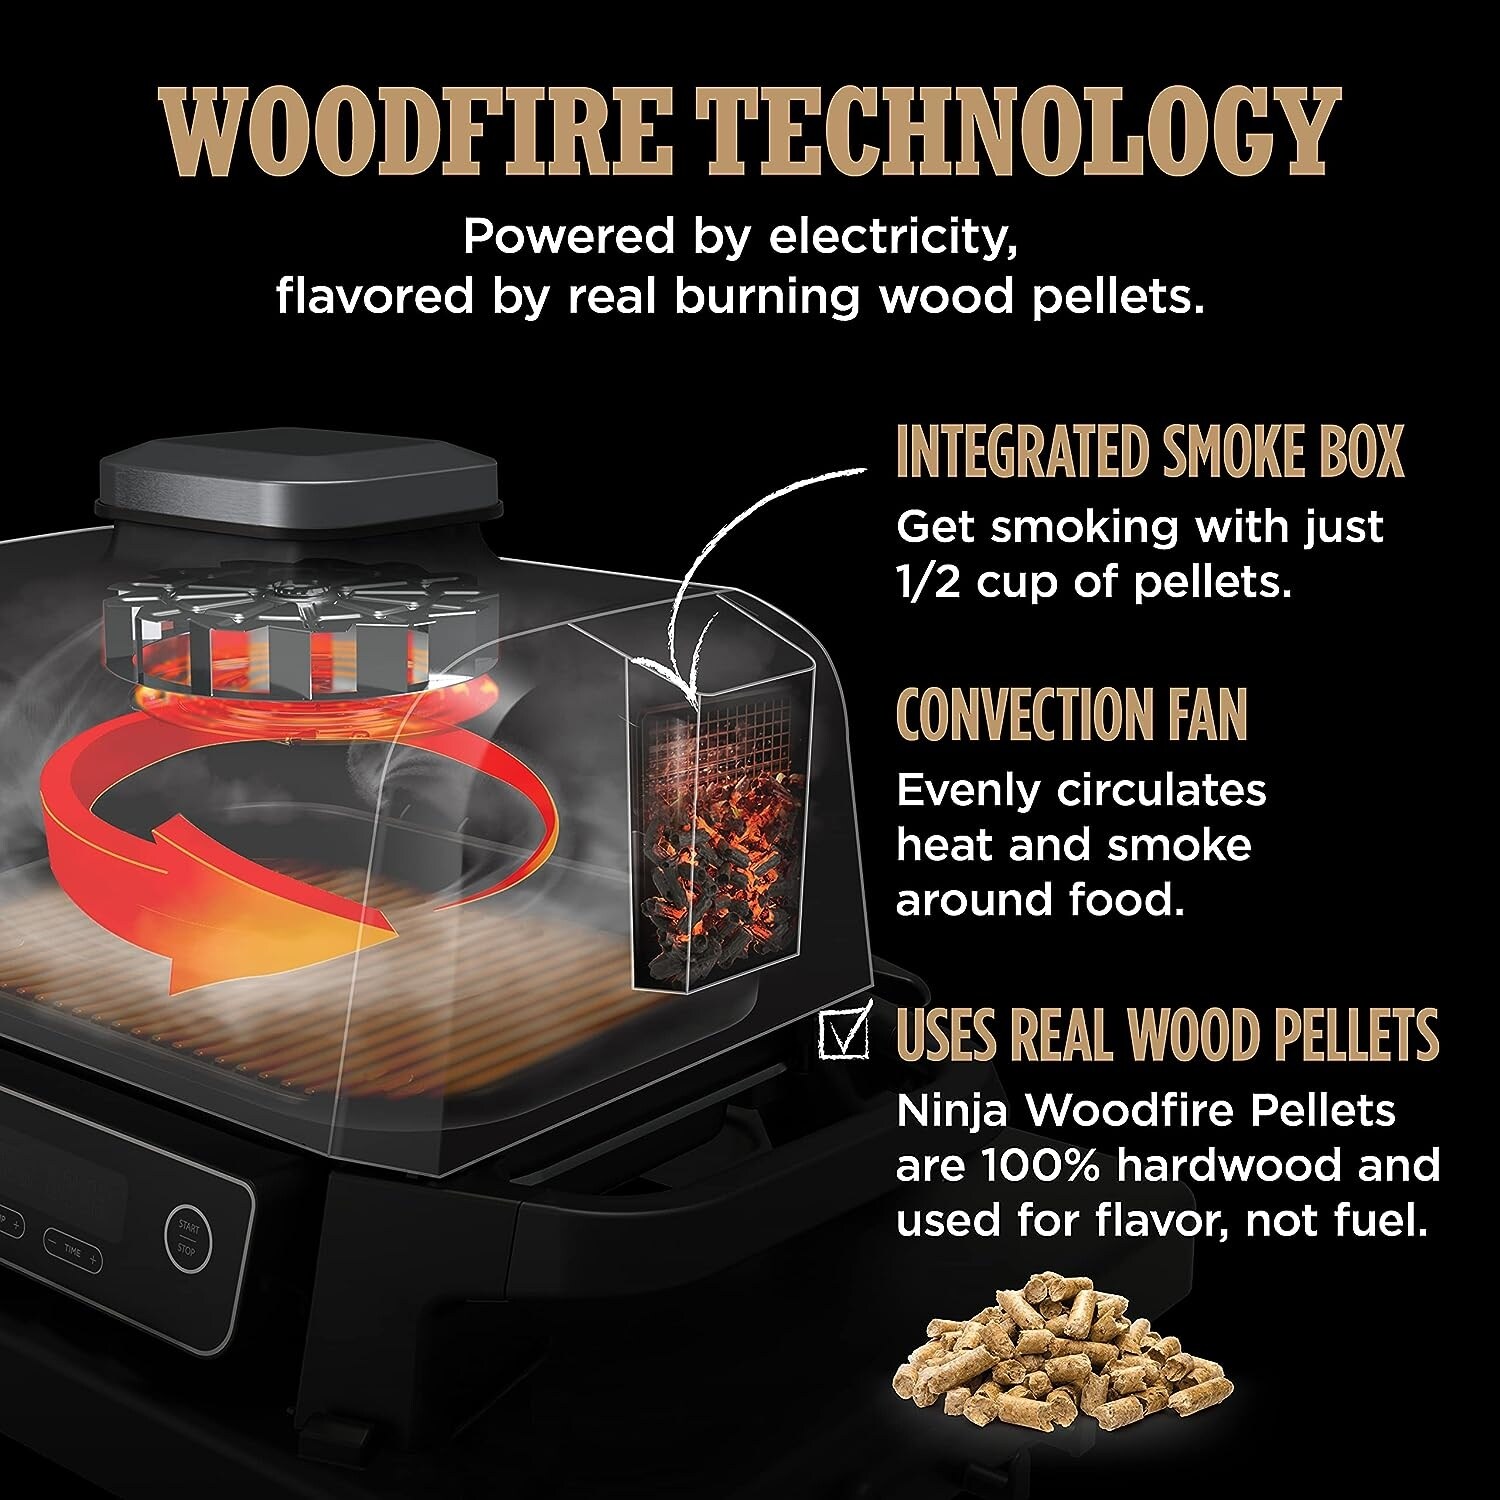 Ninja Woodfire Outdoor Grill from $279.98 Shipped (Includes Stand